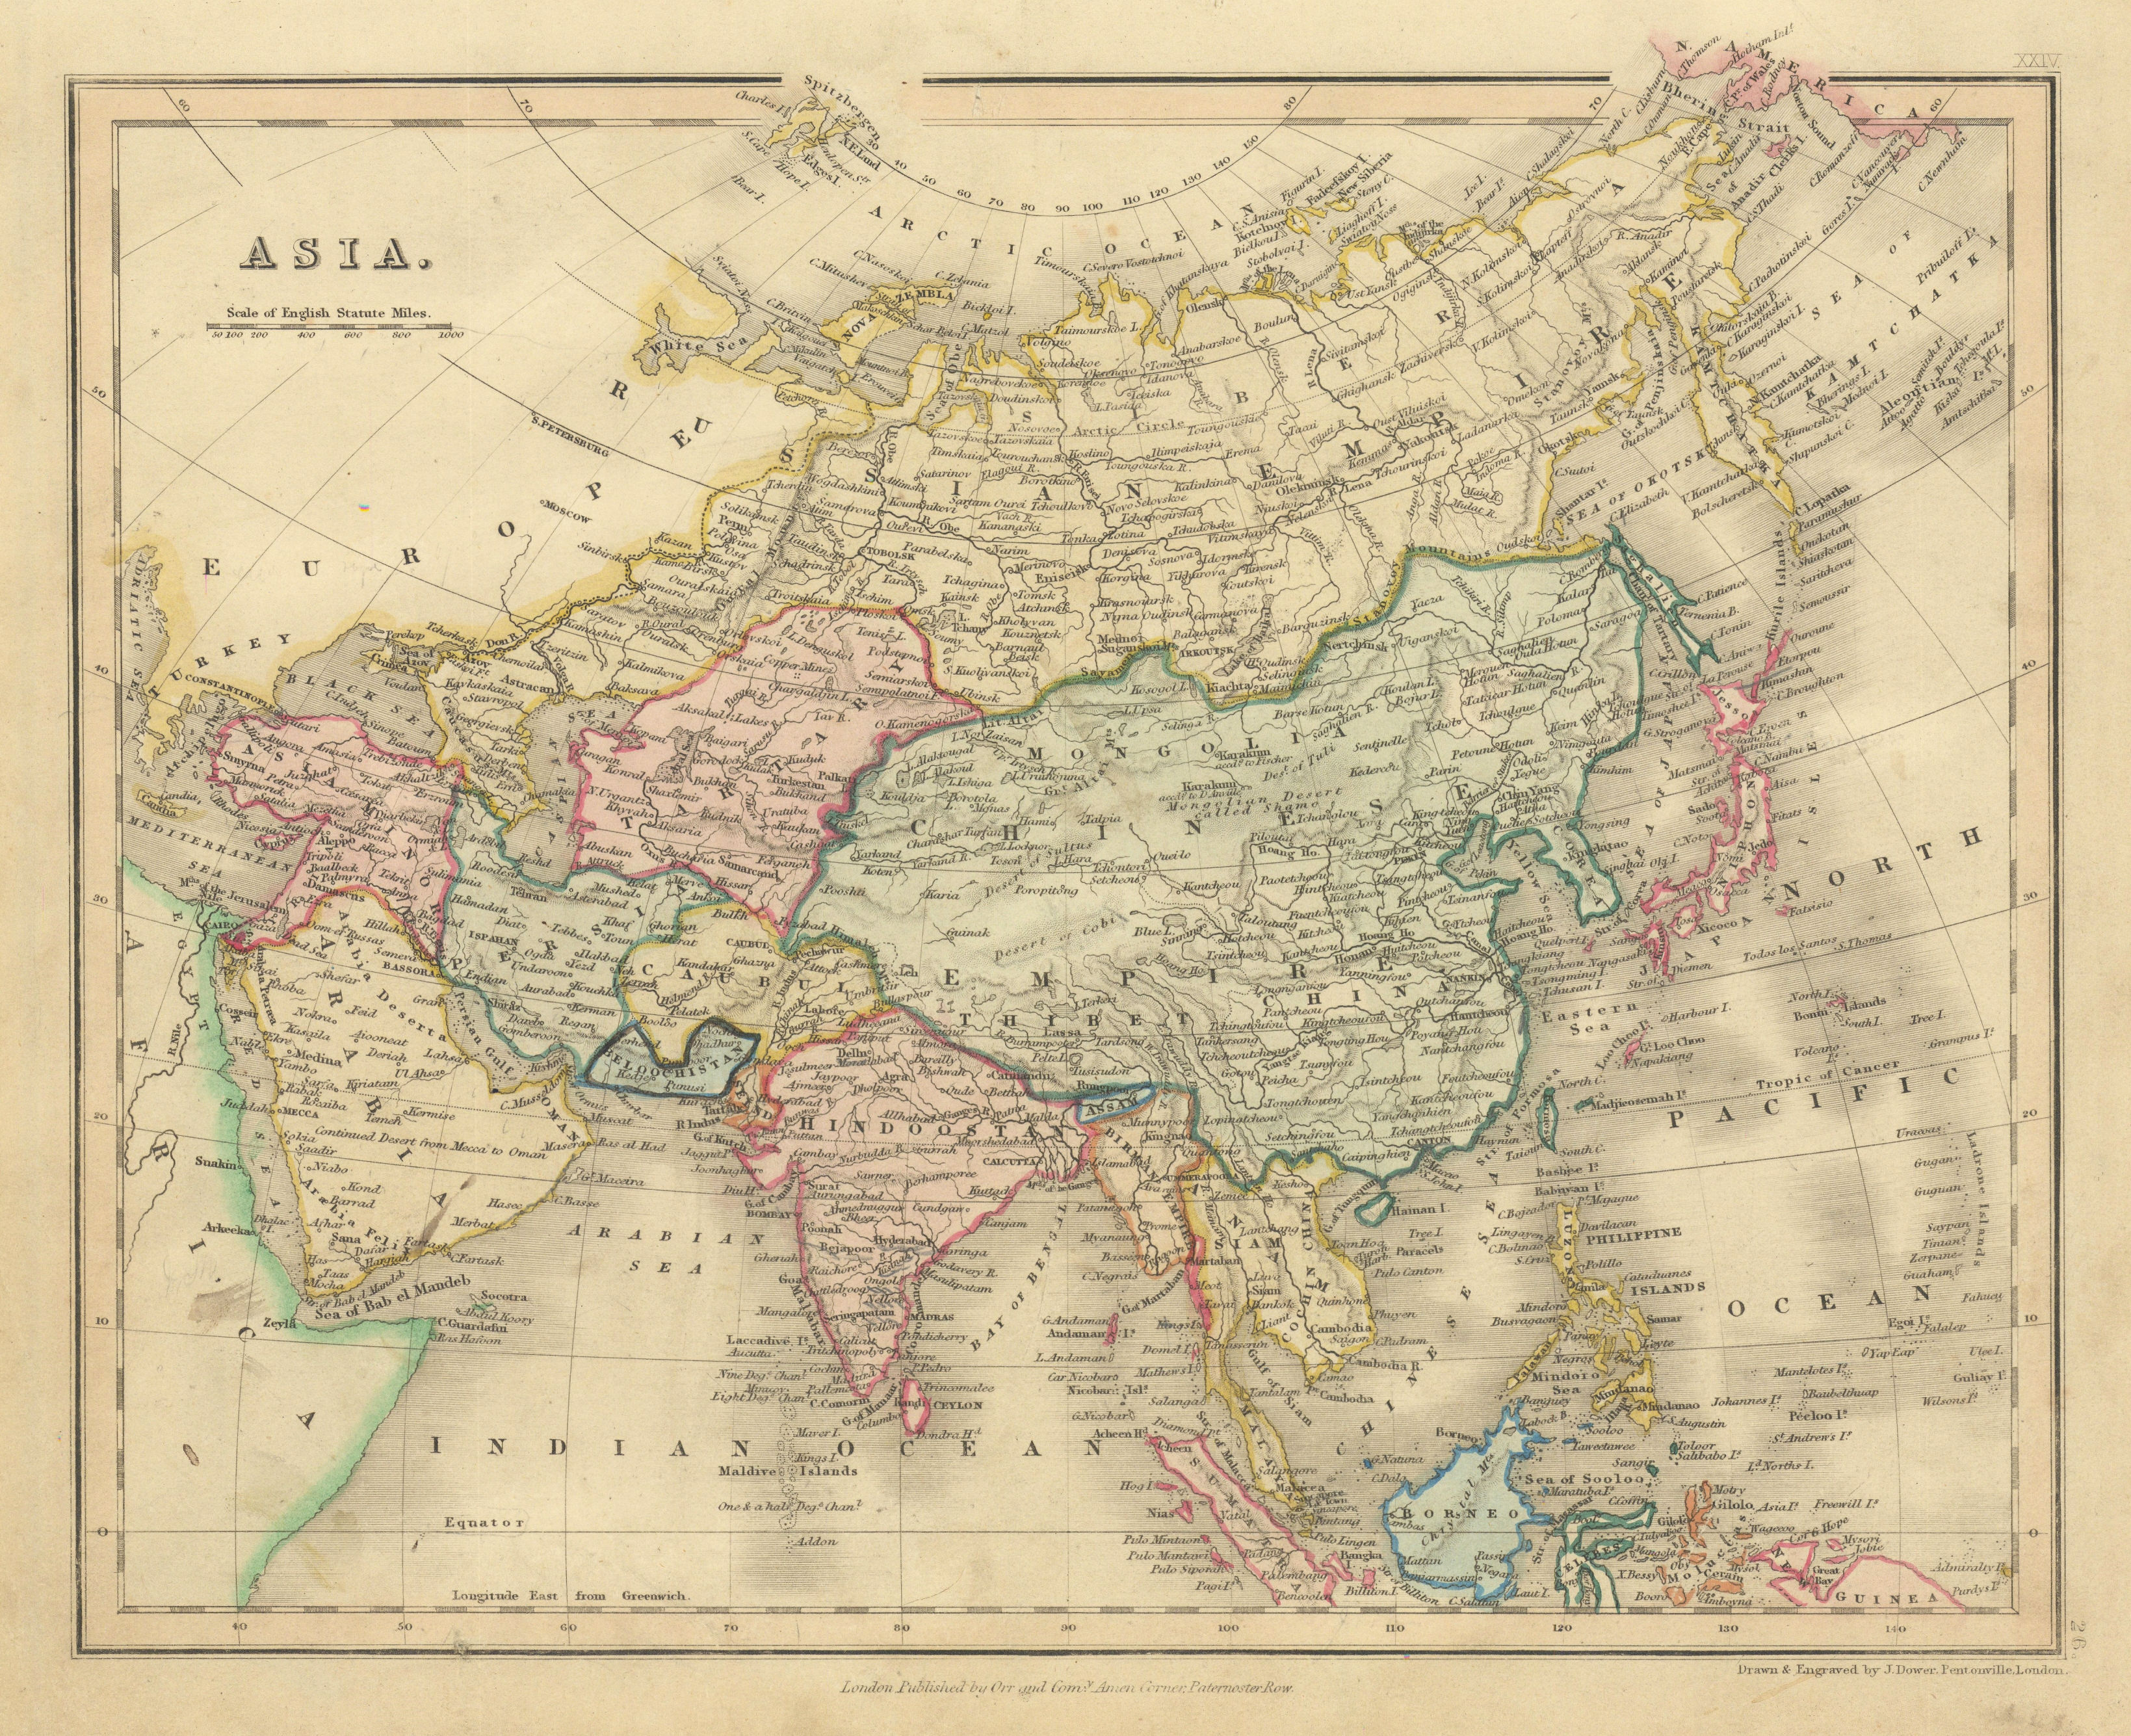 Associate Product Asia by John Dower. Arabia Tartary Persia Siam Hindoostan Niphon 1845 old map